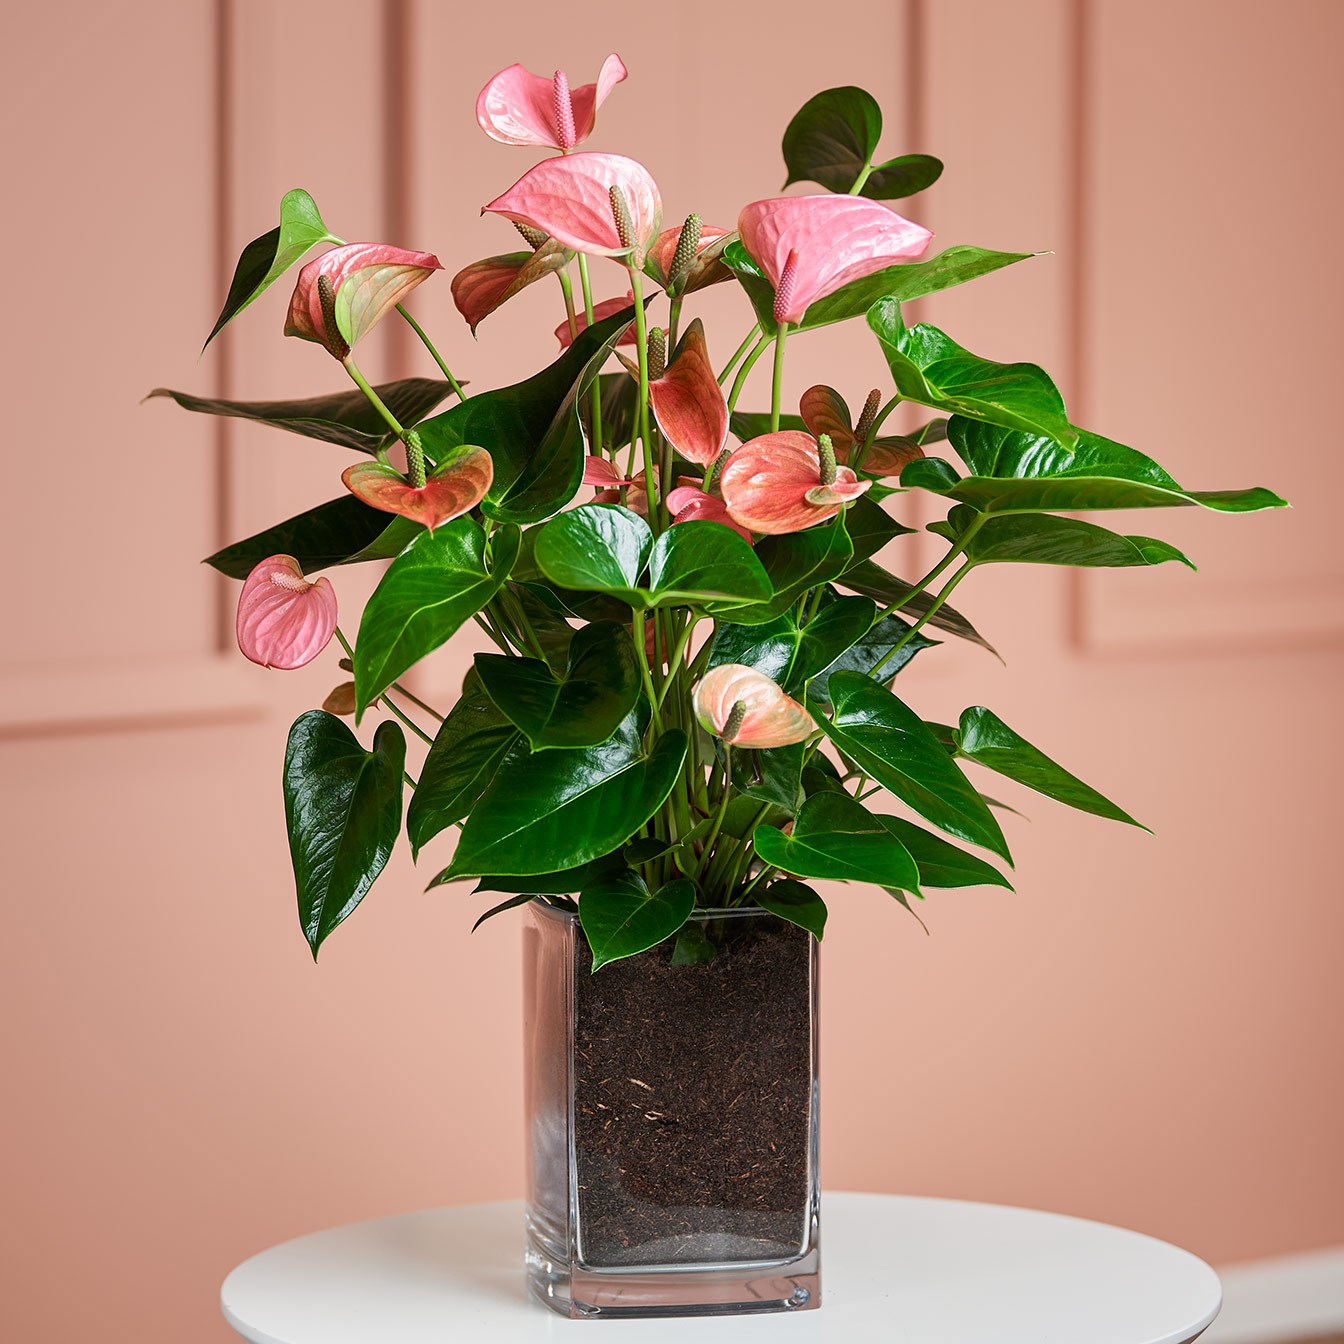 product image for Pink Flamingo Flower in Vase